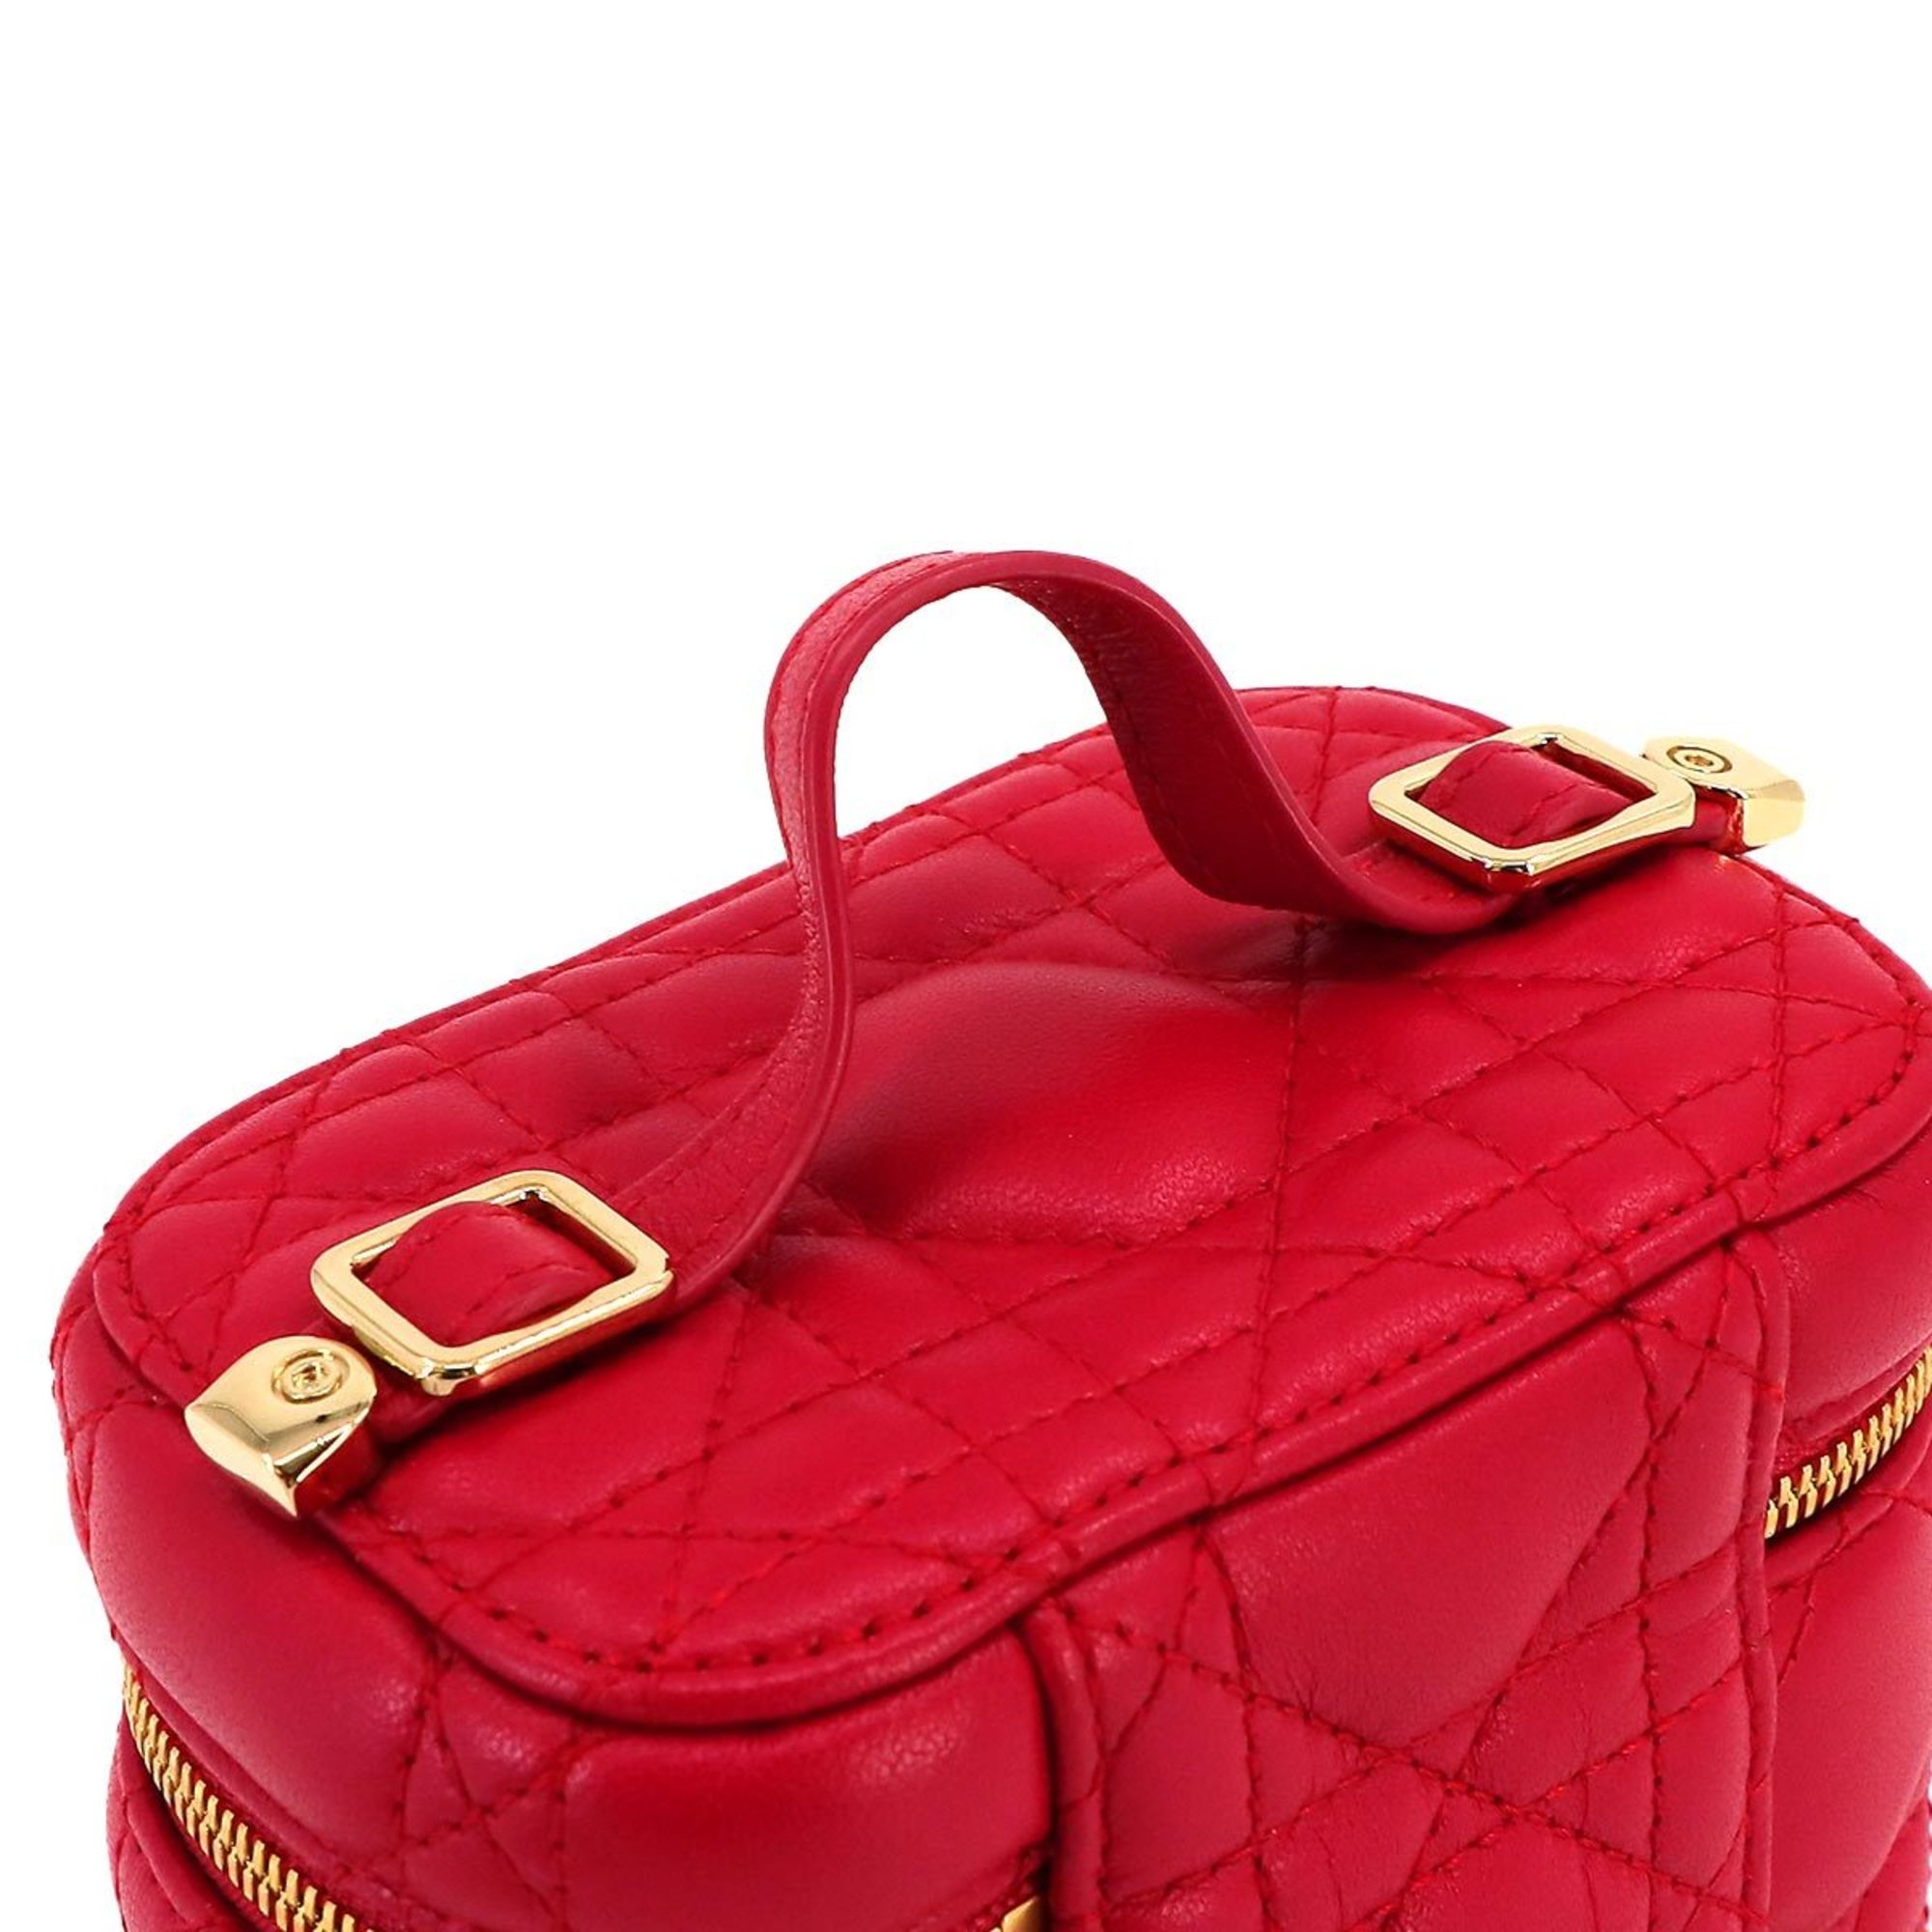 Christian Dior Lady Micro Vanity 2way Hand Shoulder Bag Leather Red Case